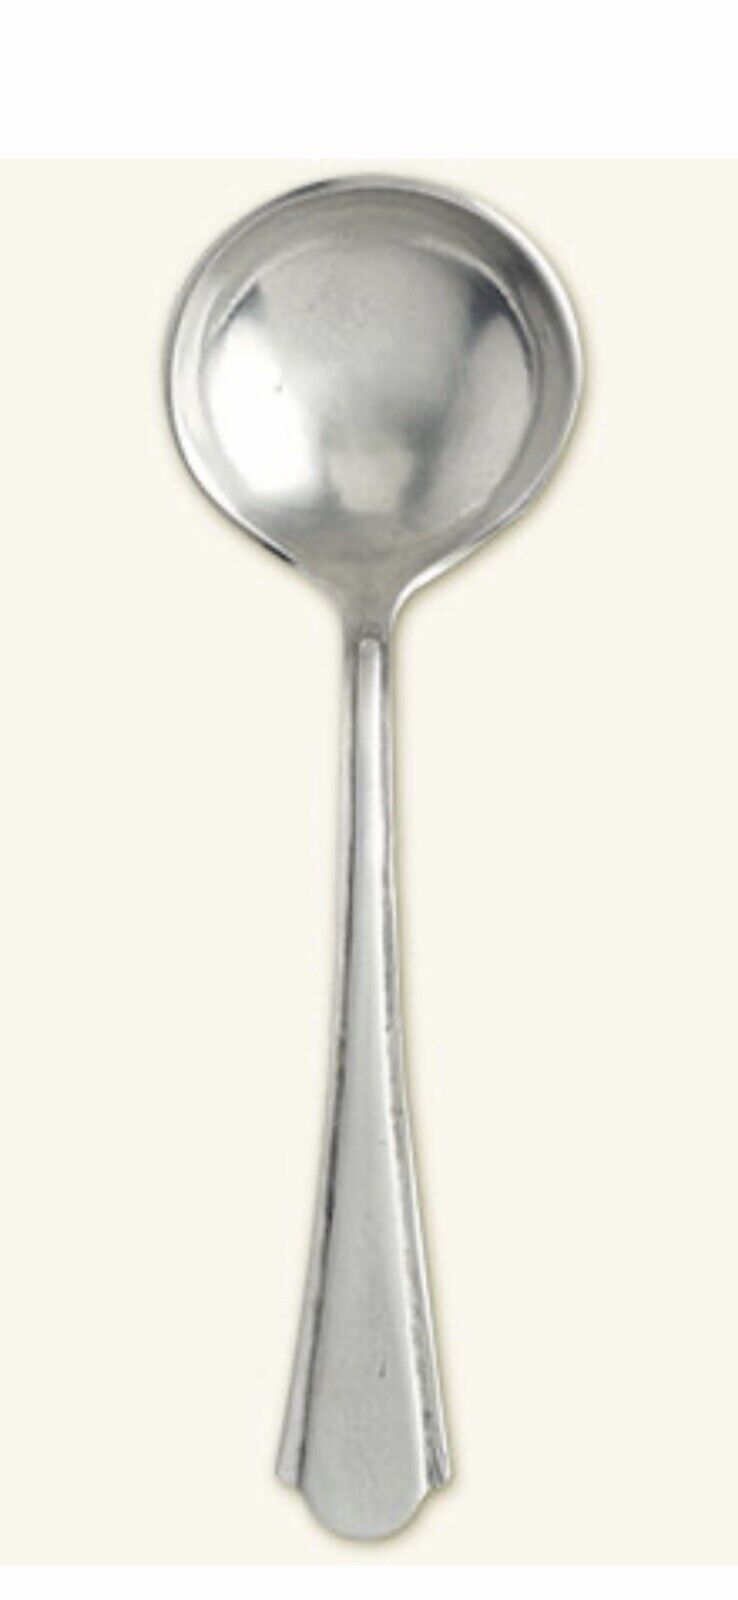 ~Match Italy*NEW*Pewter Flat Gravy Spoon Qty 2 Spoons~Free Shipping~